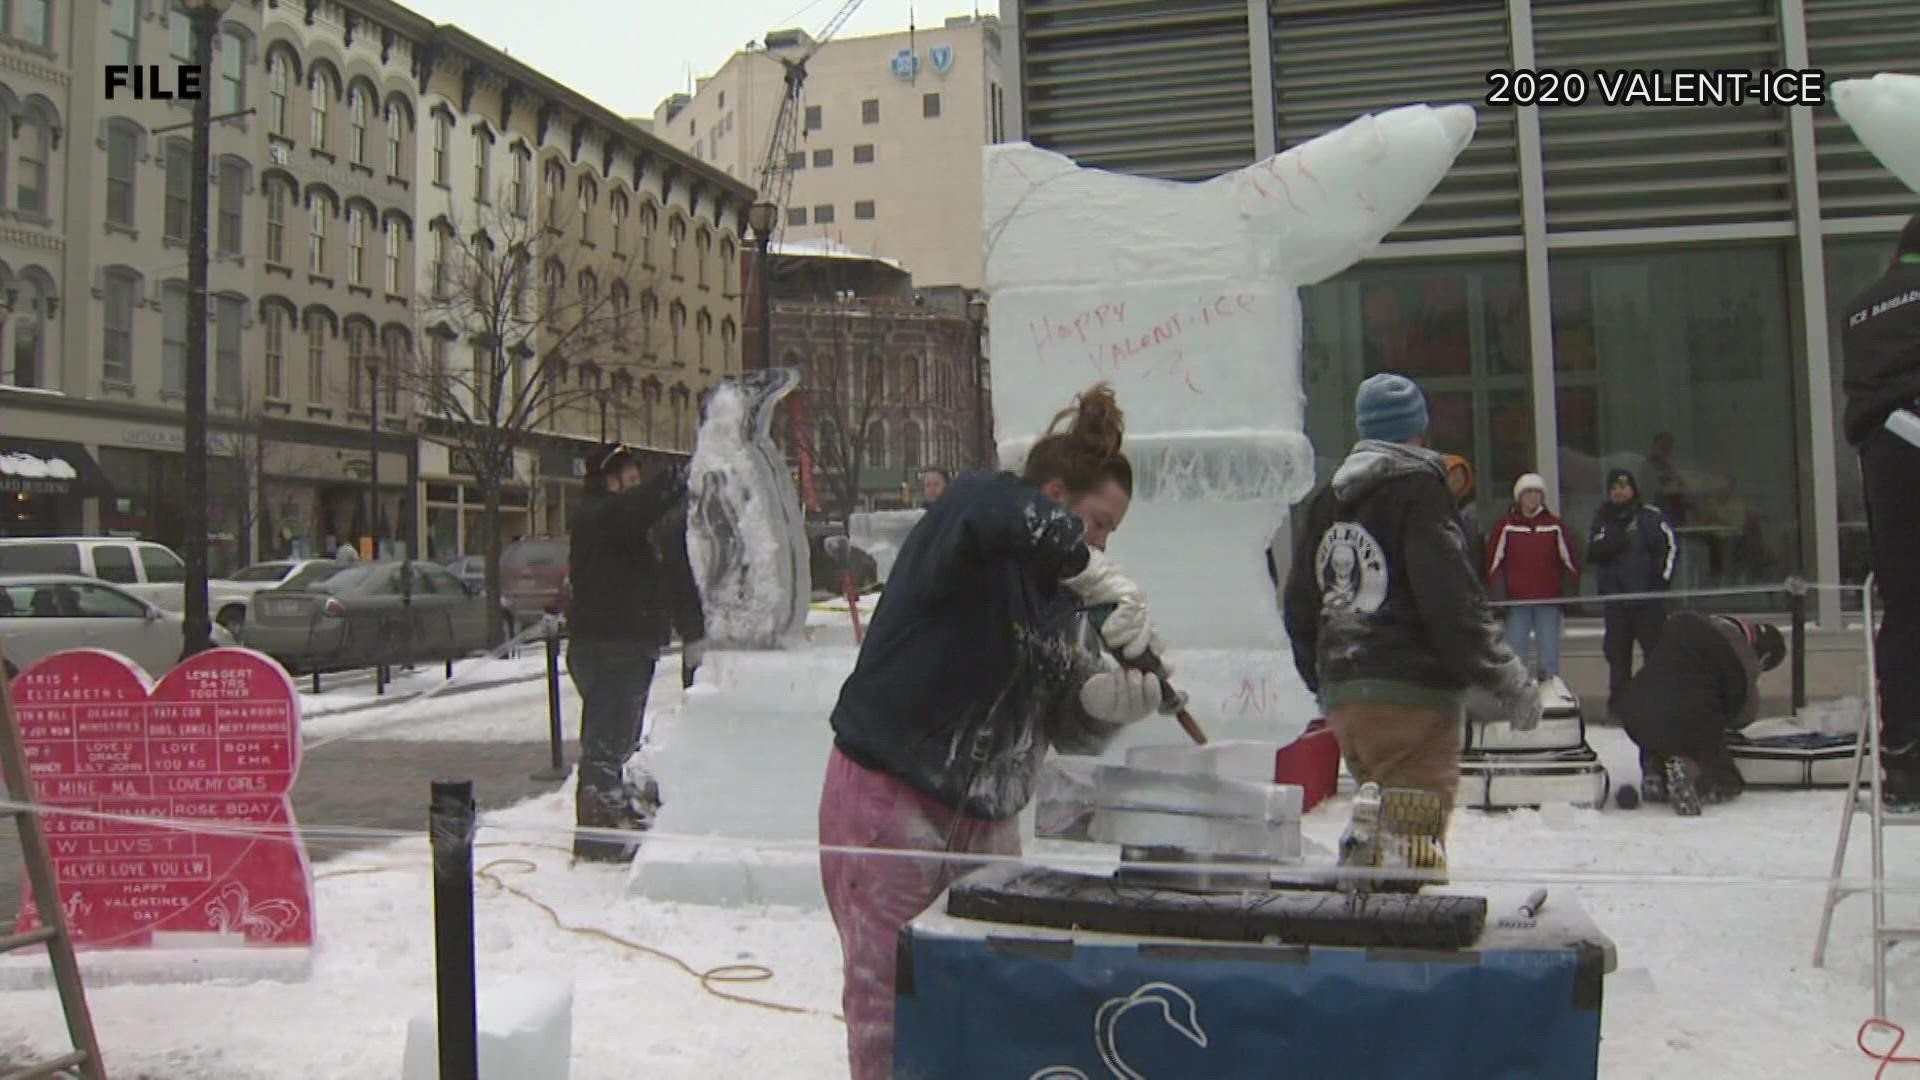 Ice sculptures coming to downtown Grand Rapids